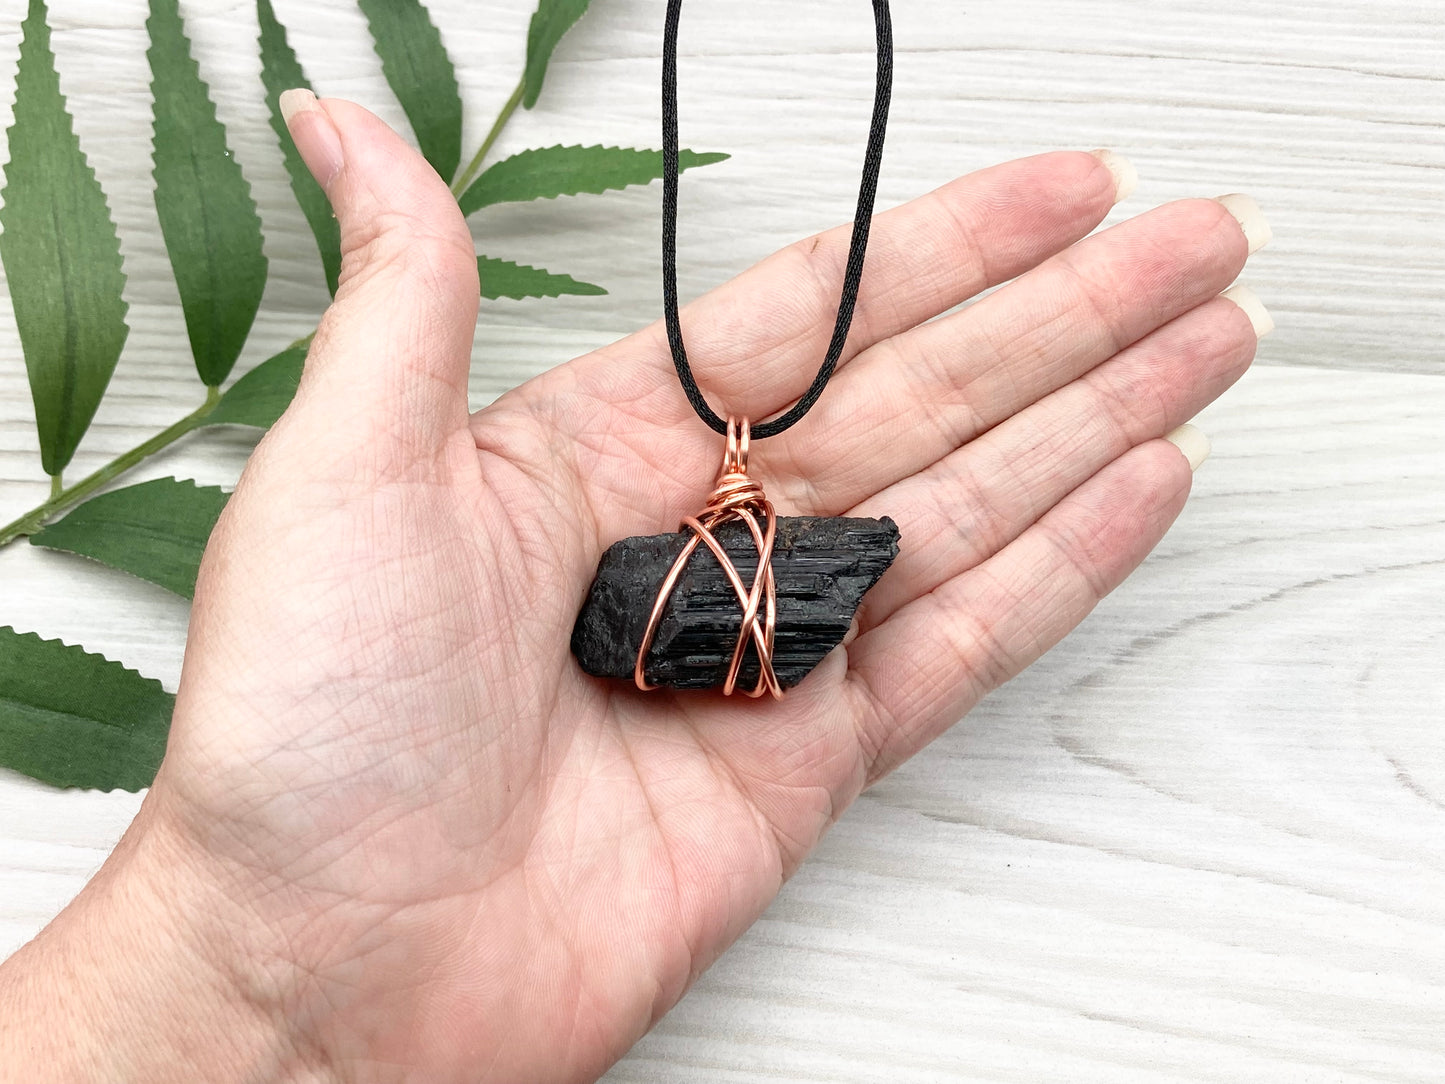 Chunky Black Tourmaline Necklace. Copper Wire Wrapped Stone Pendant. Raw Crystal Statement Jewelry. Comes On A Black Chain.